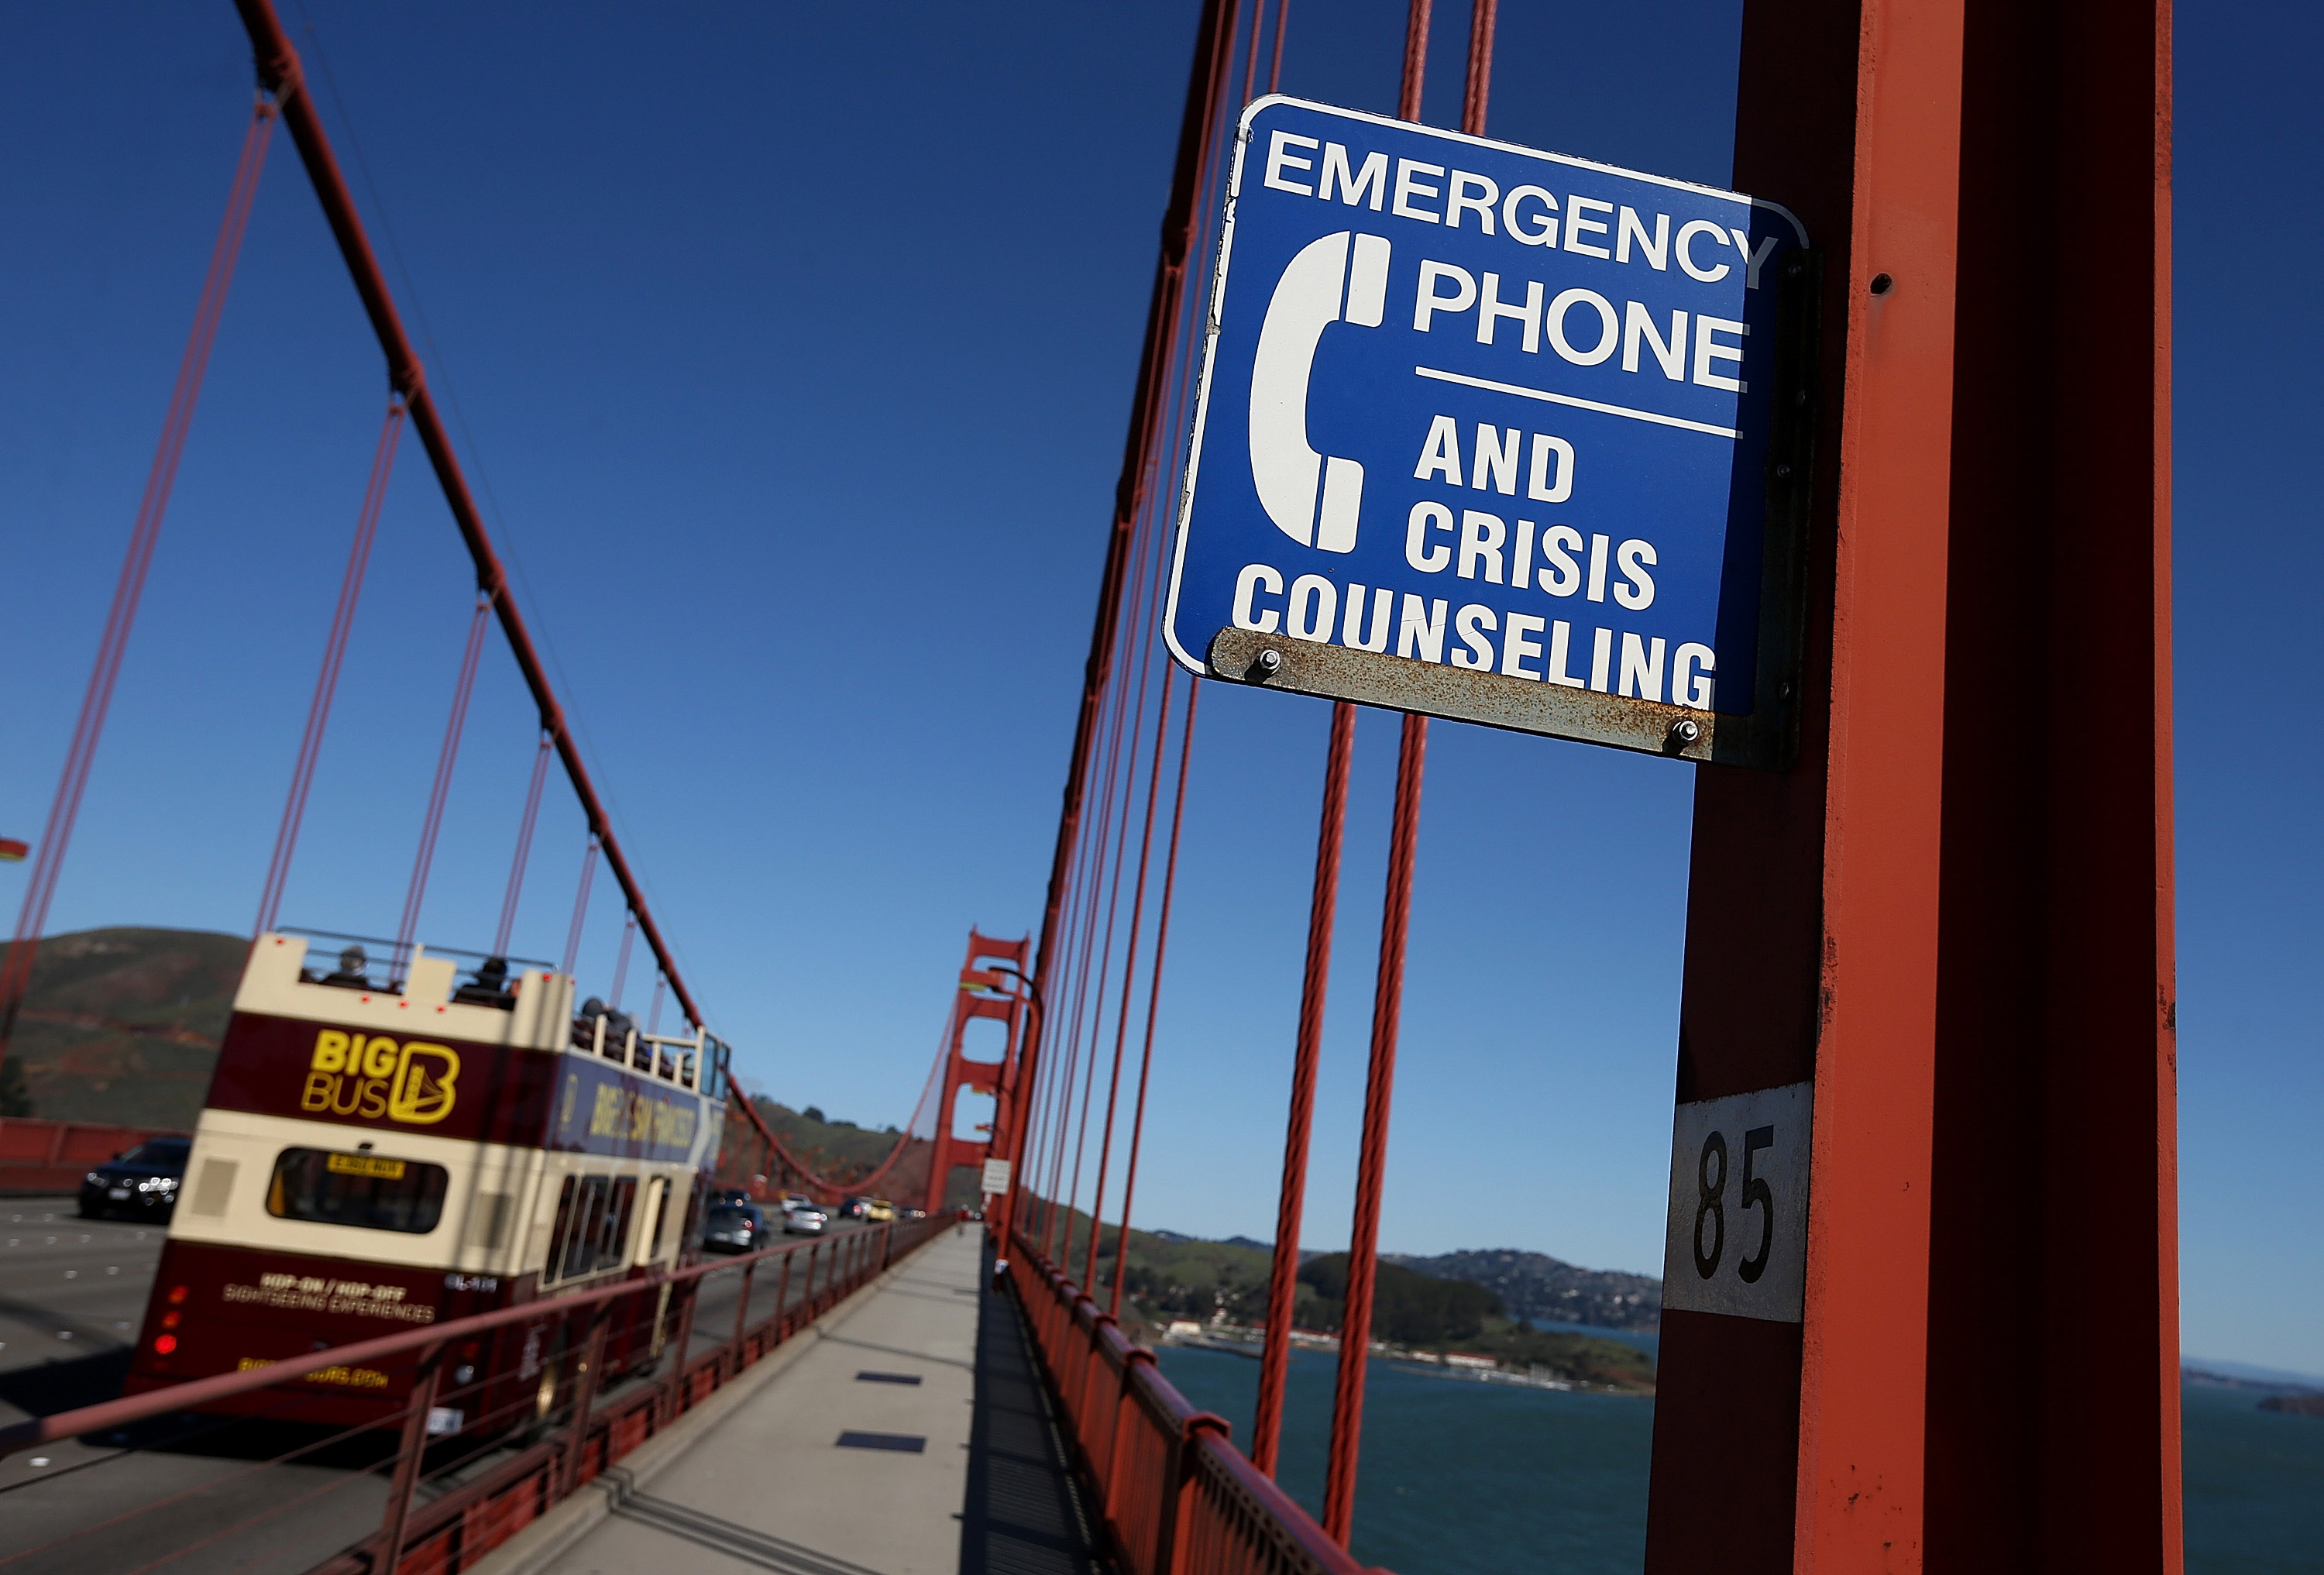 A sign alerting people to use an emergency crisis counseling phone if in distress. (Justin Sullivan&mdash;Getty Images)